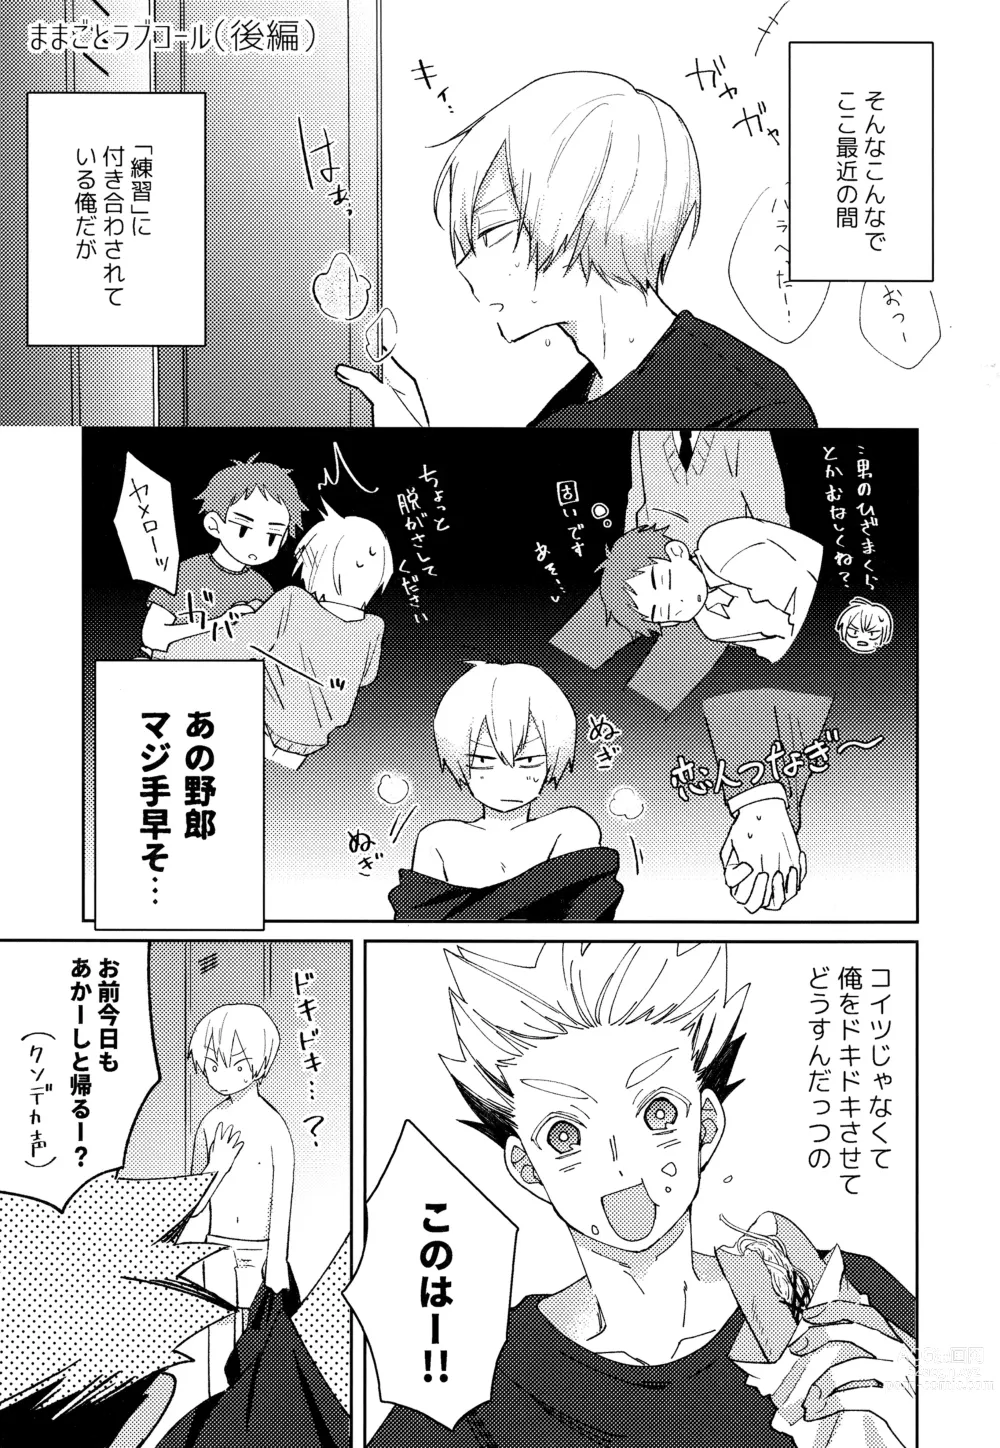 Page 23 of doujinshi Light Side Day